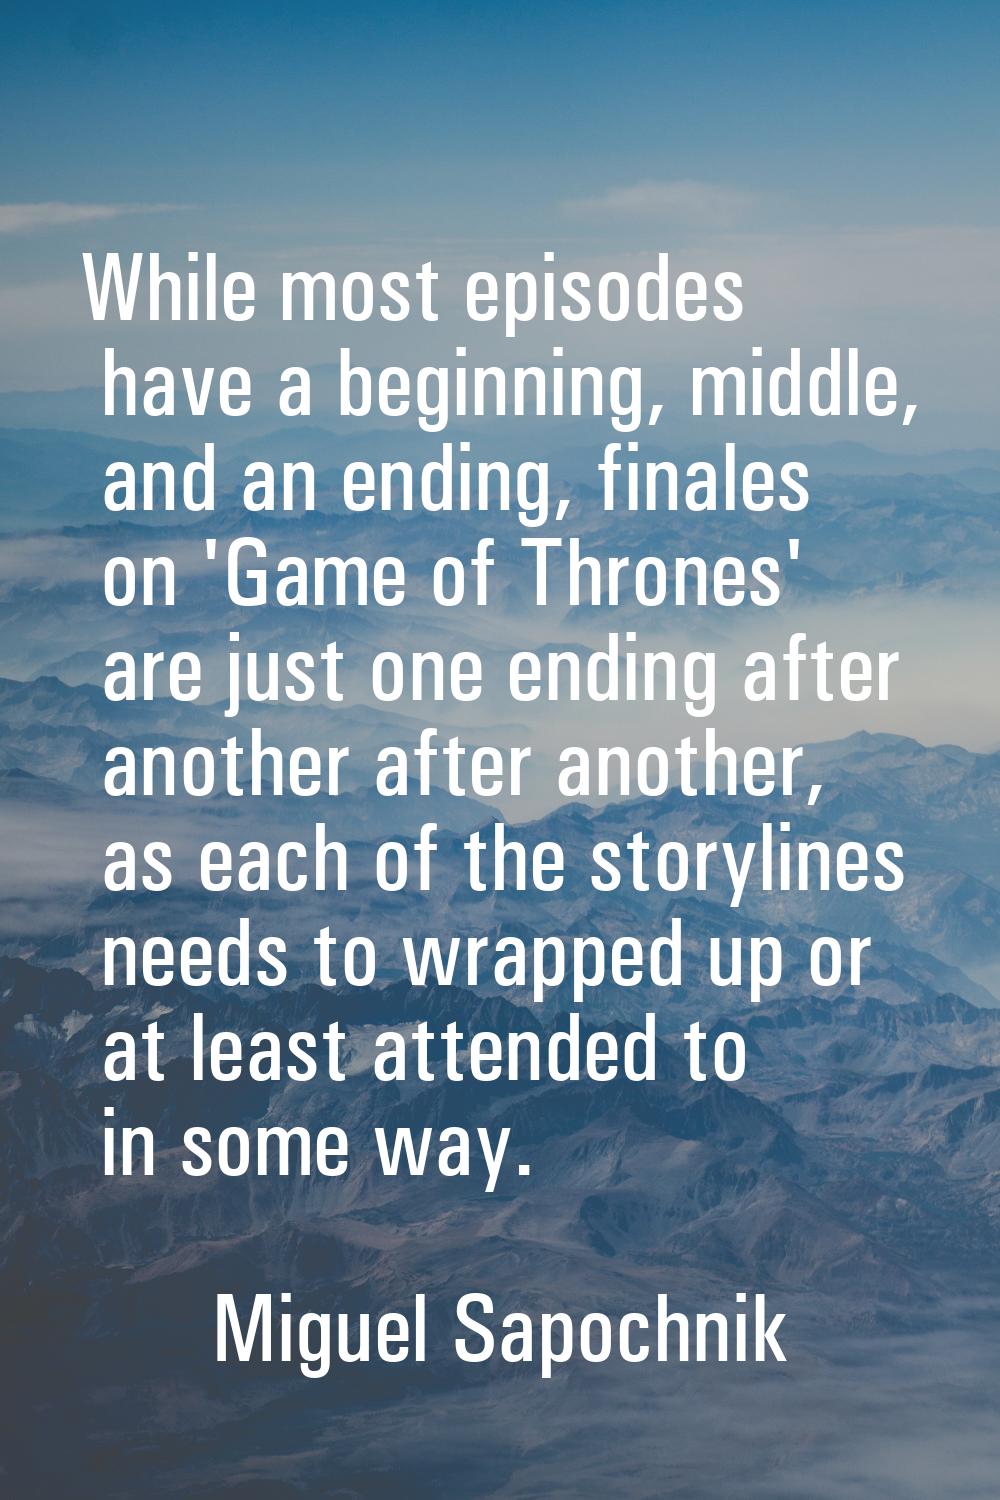 While most episodes have a beginning, middle, and an ending, finales on 'Game of Thrones' are just 